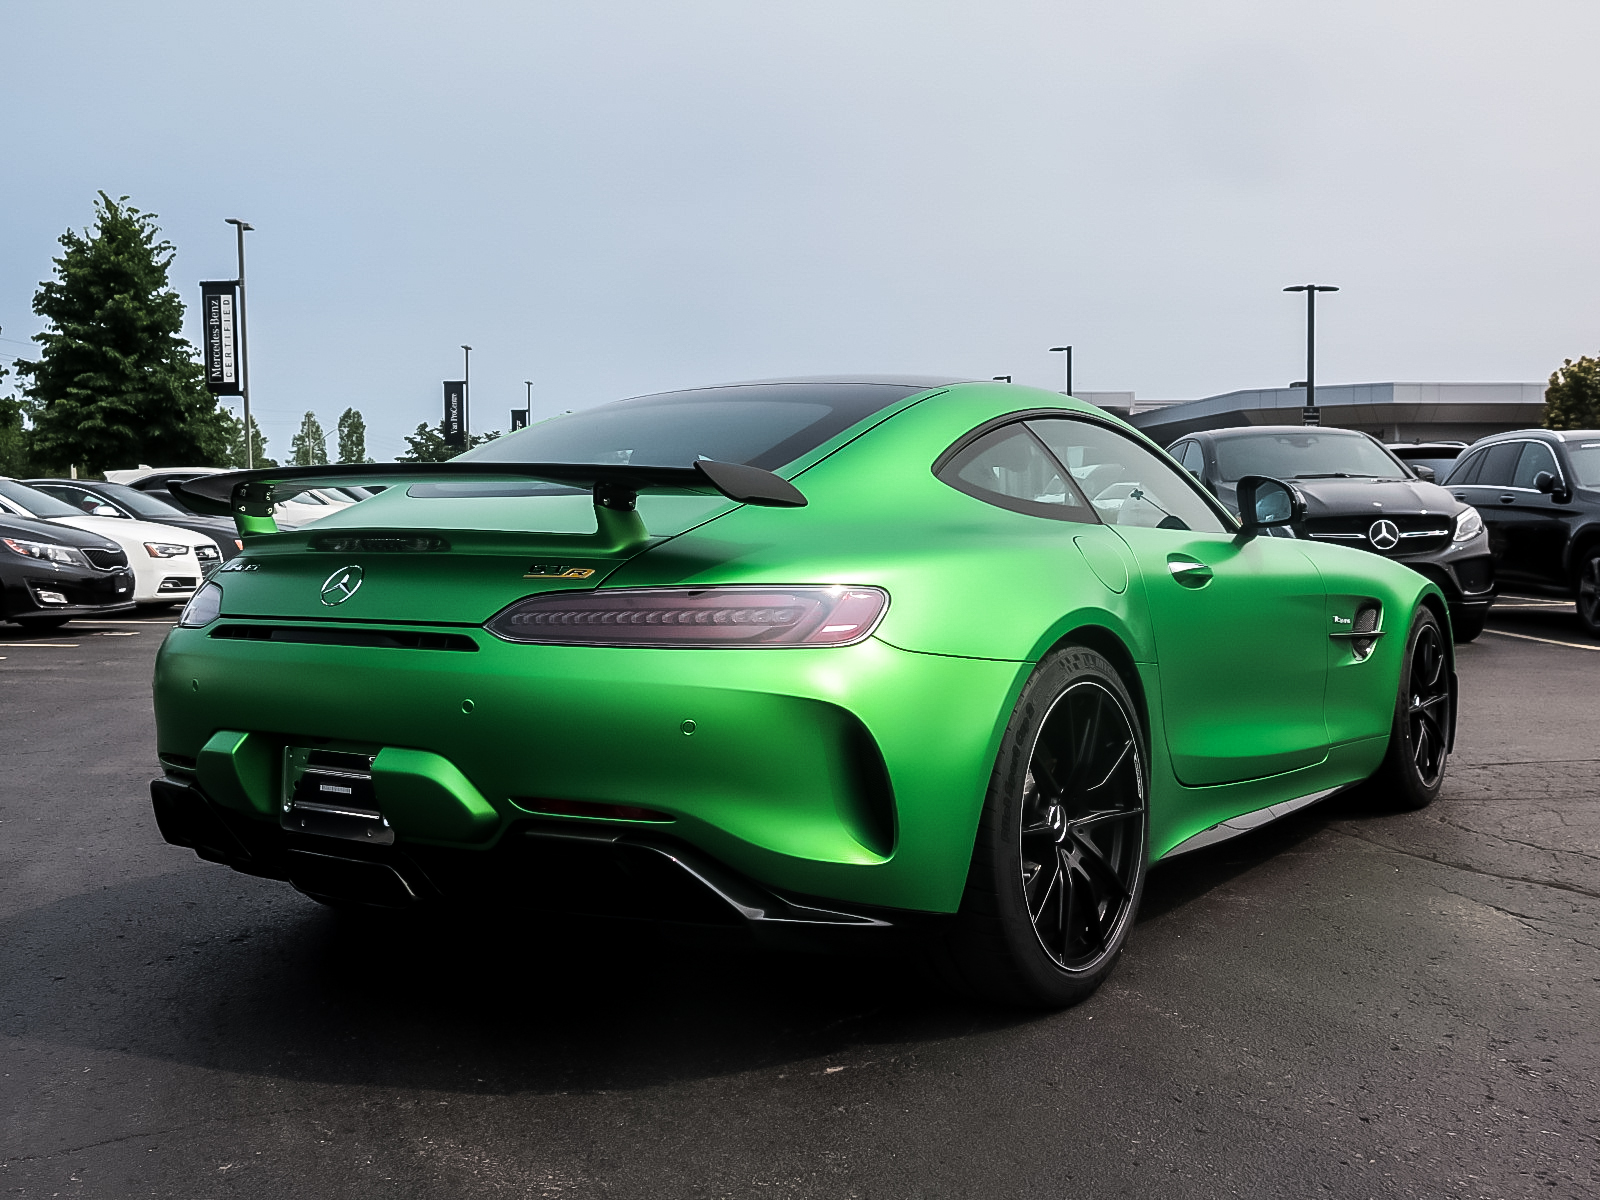 New 2020 MercedesBenz AMG GT R Coupe 2Door Coupe in Kitchener 39198